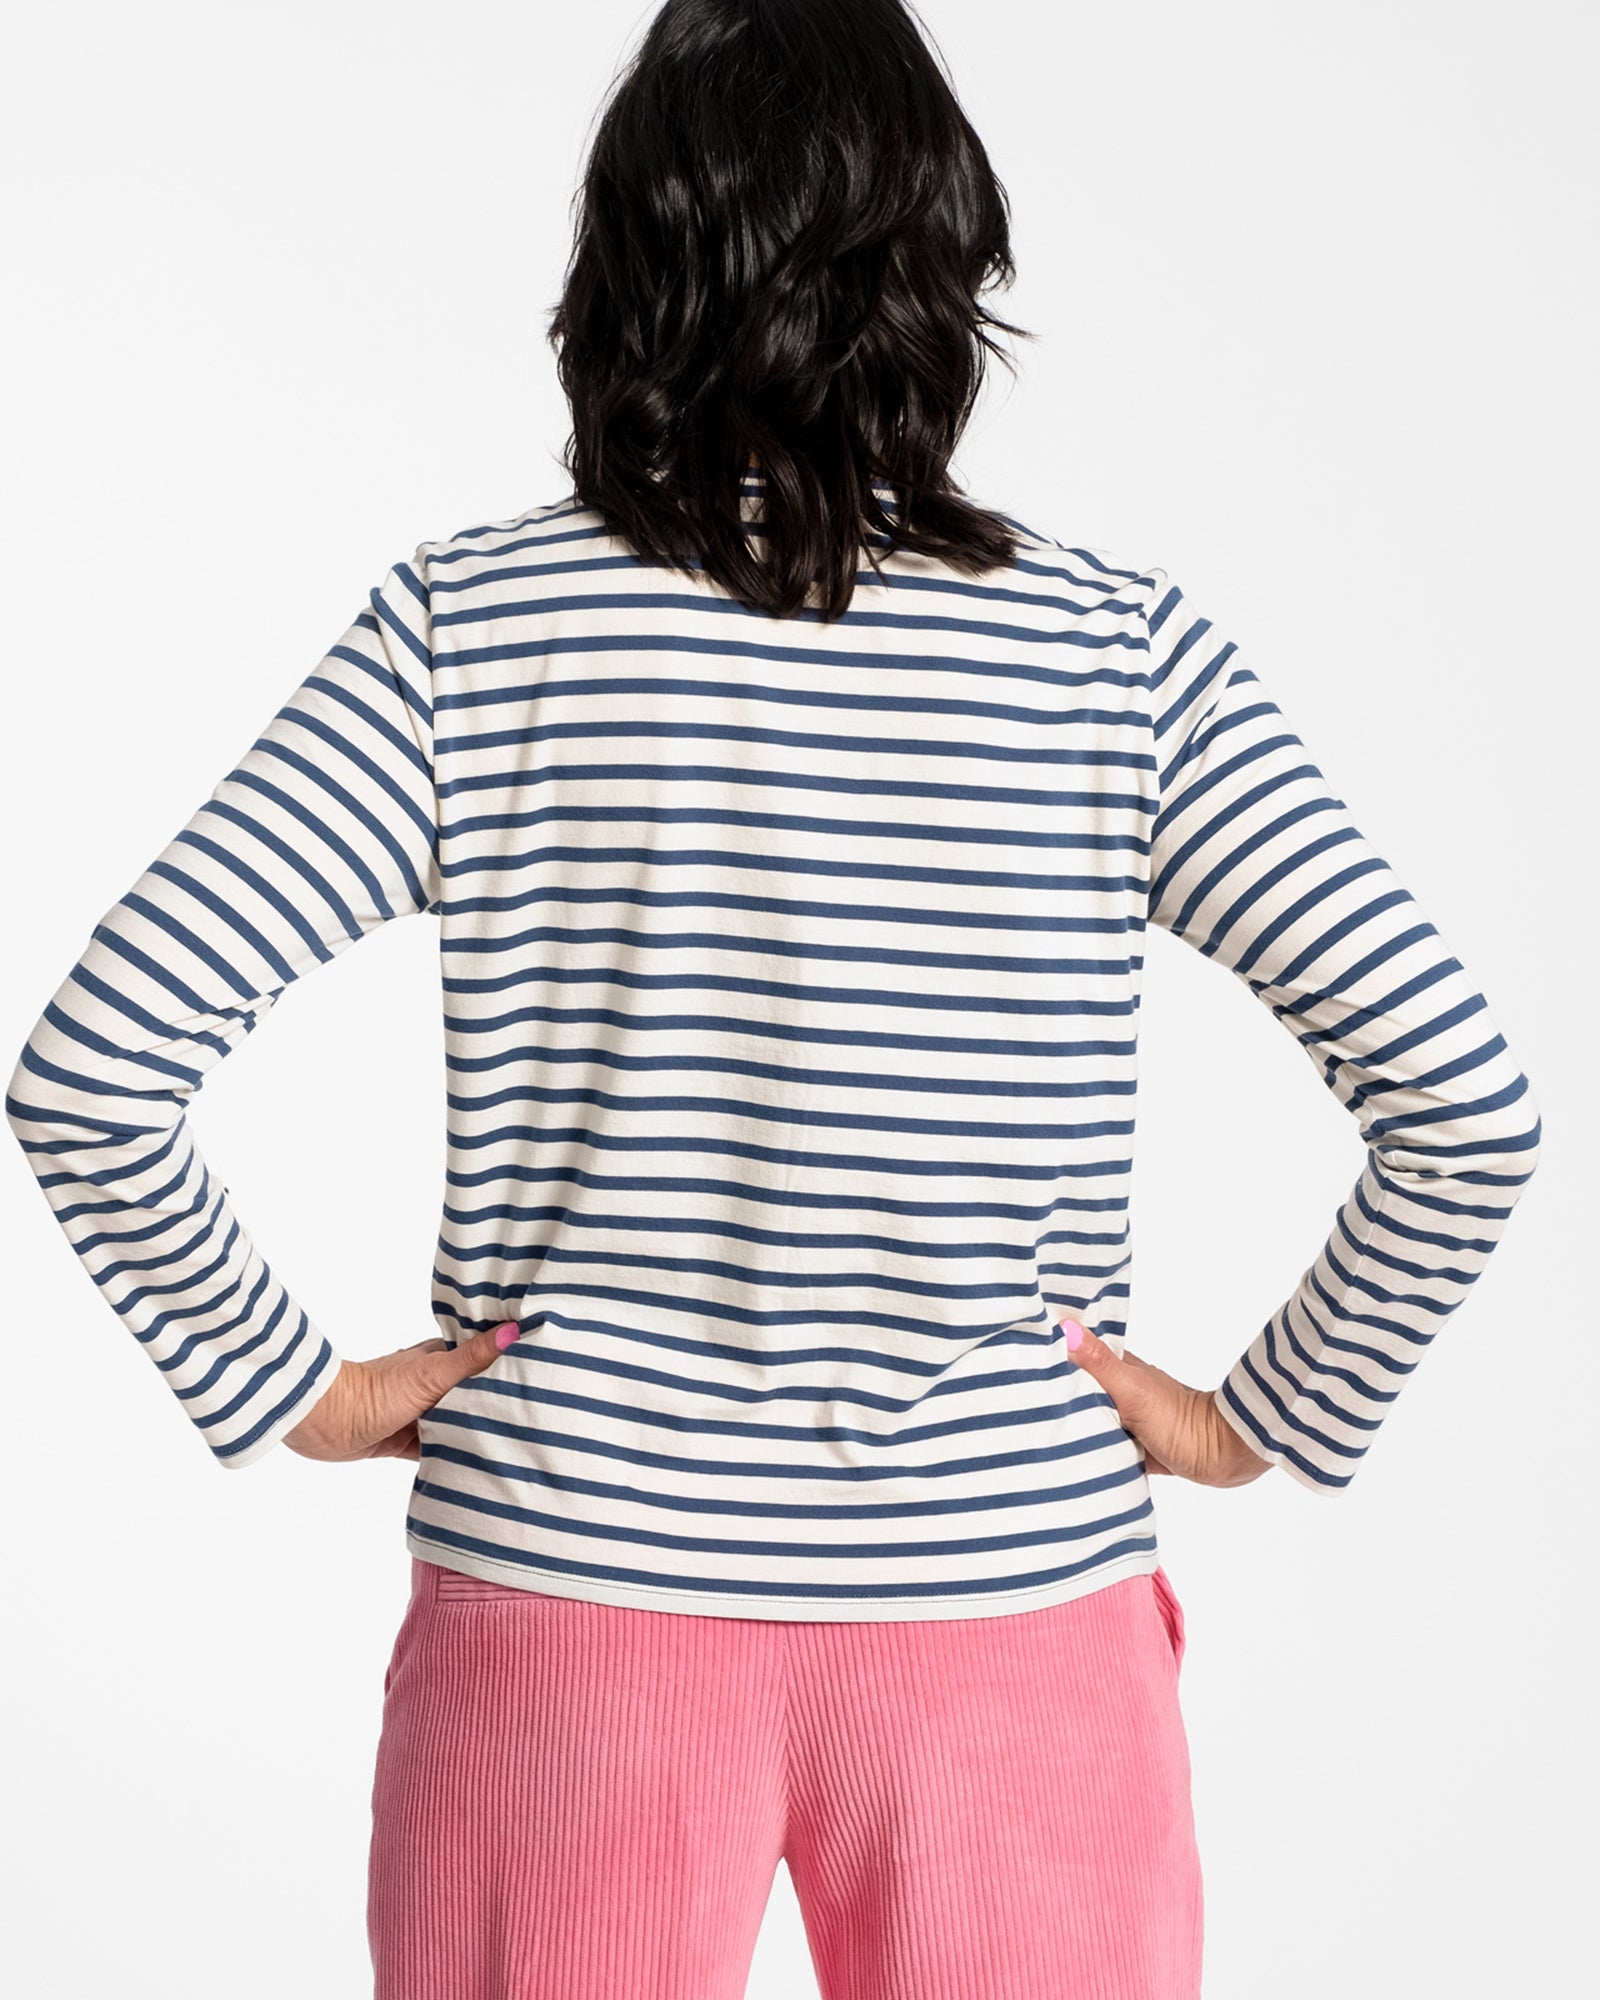 Long Sleeve Striped Tee Shirt Oyster Navy